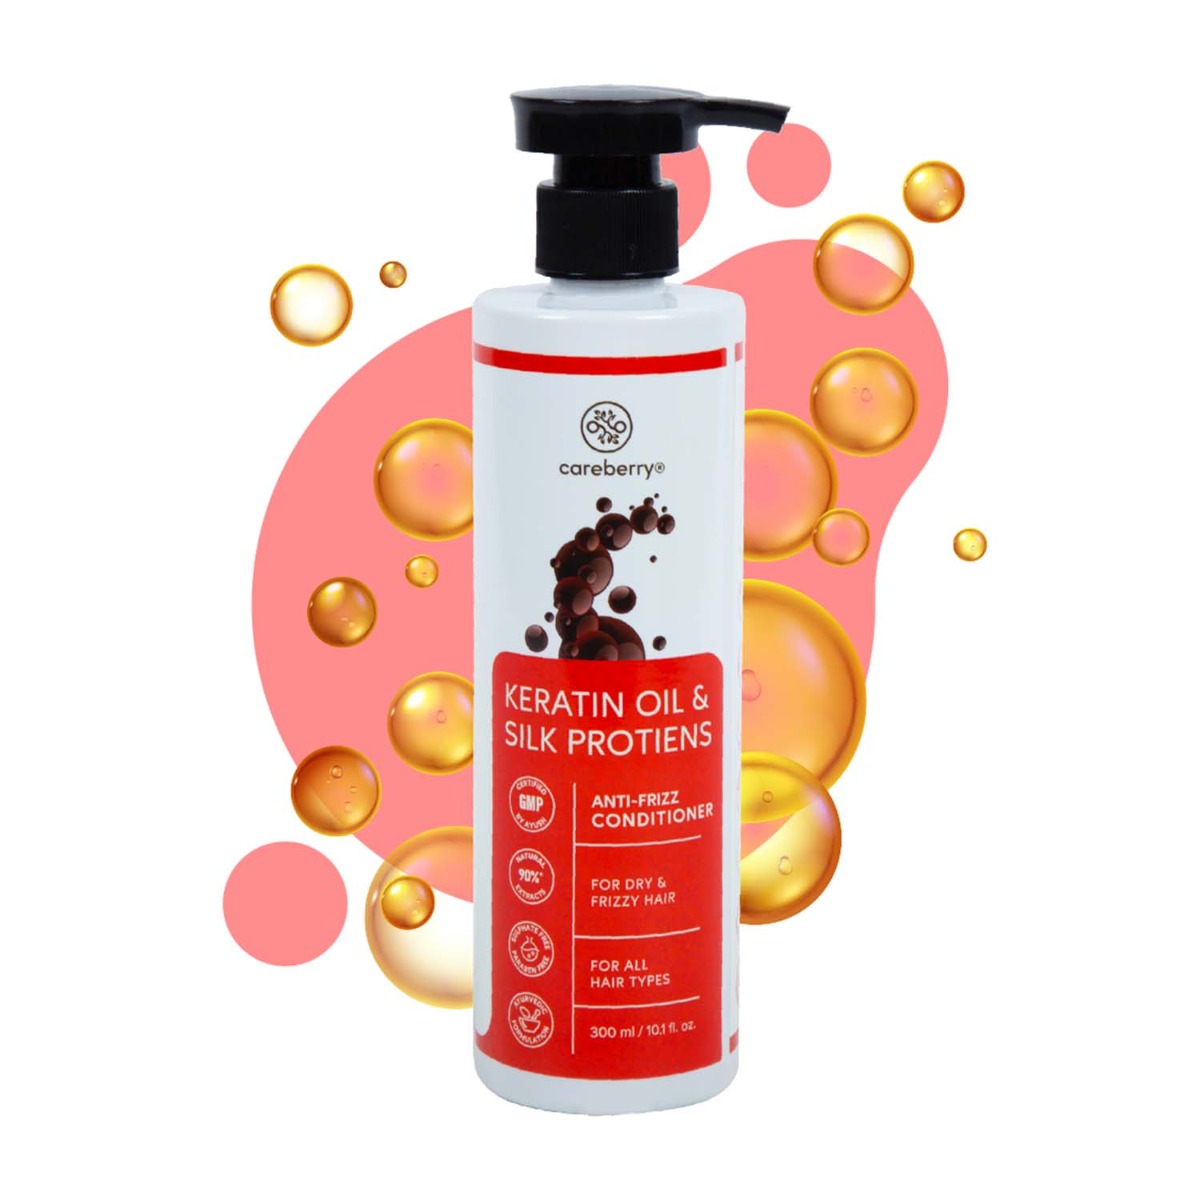 Careberry Keratin Oil & Silk Proteins Anti-Frizz Conditioner for Dry & frizzy Hair, 300ml